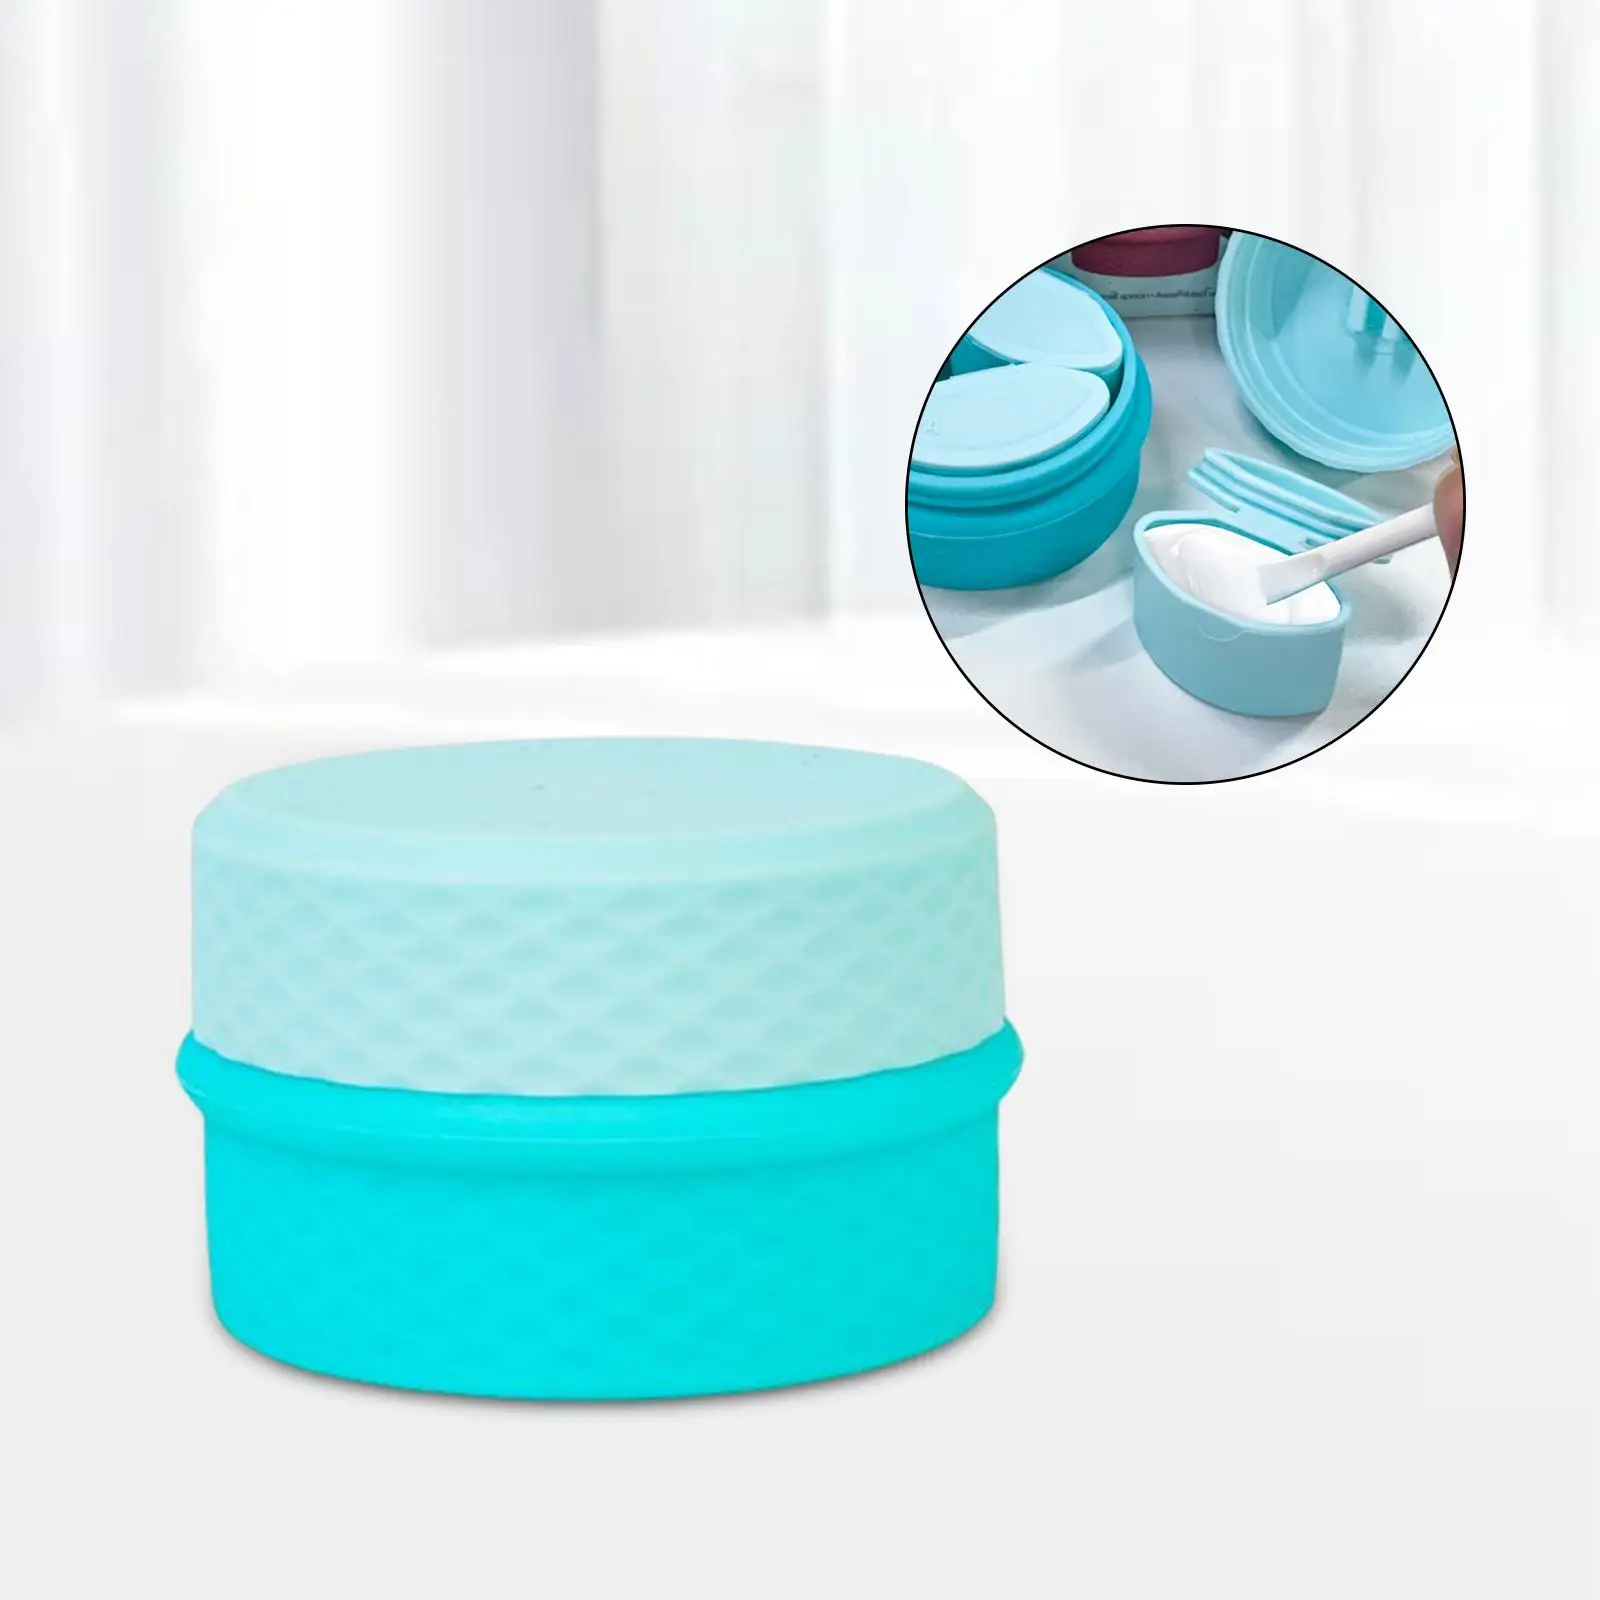 Cosmetics Cream Jars Makeup Sample Containers for Travelling Luggage Handbag